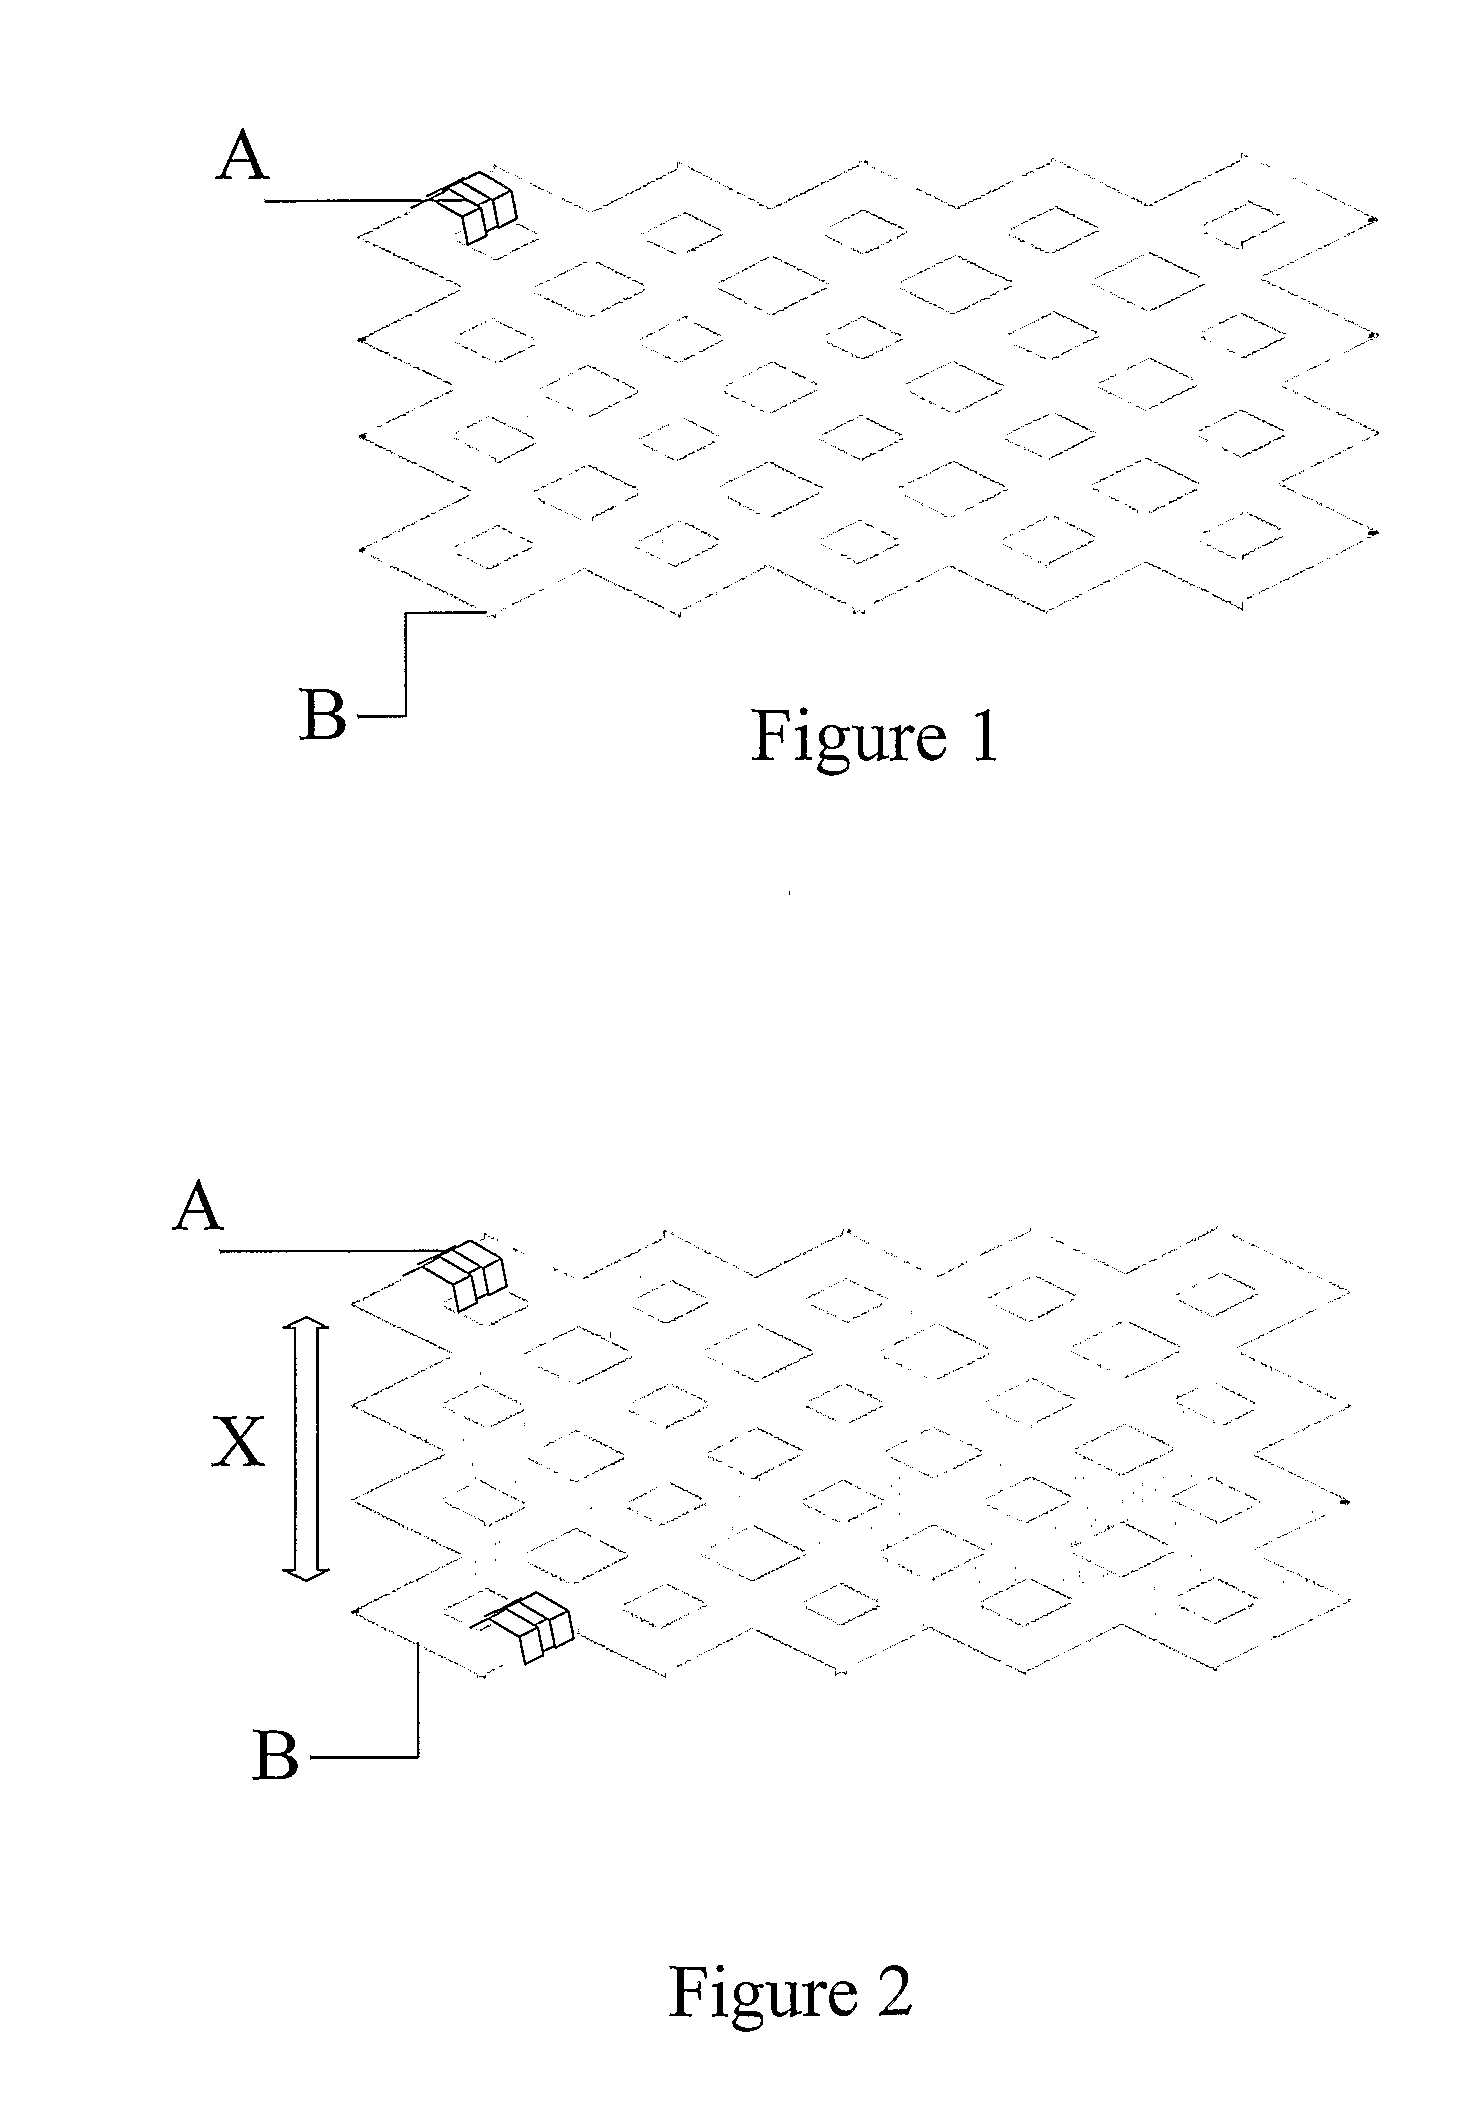 Method of monitoring positioning of polymer stents